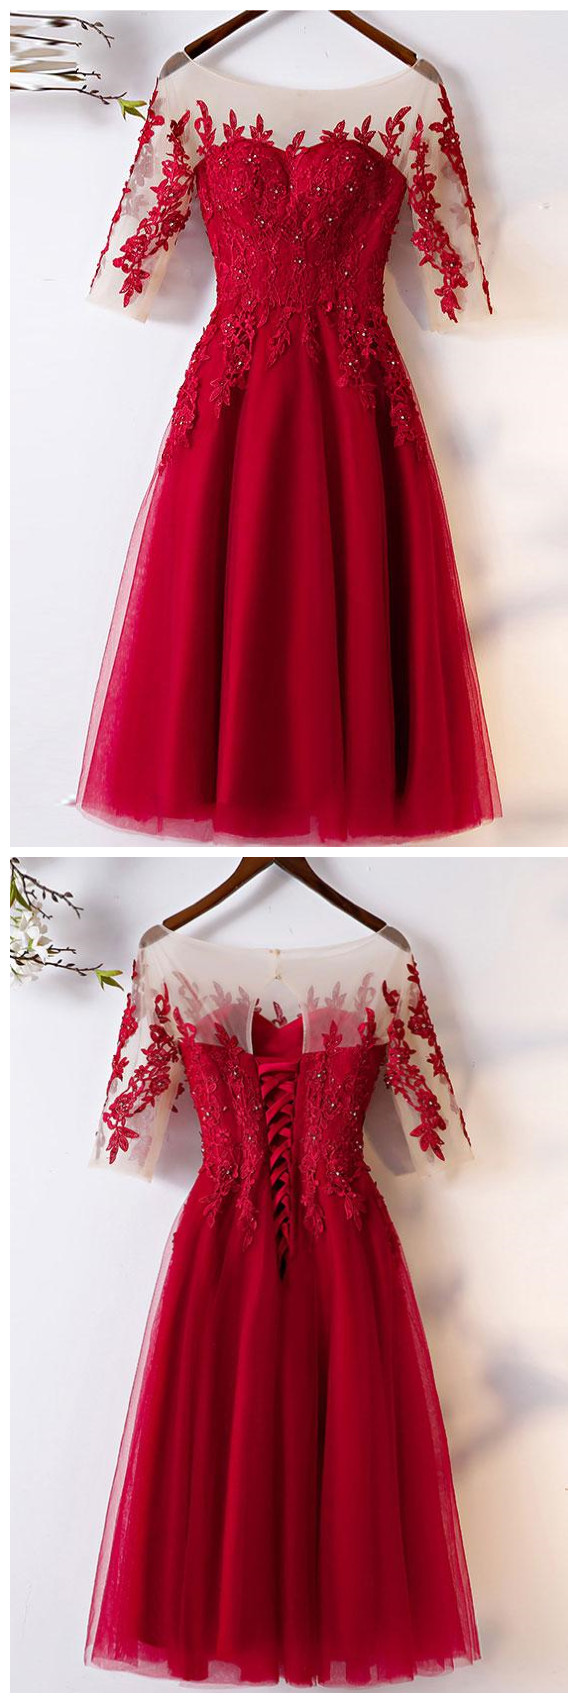 Sexy Scoop Neck Short Homecoming Dress Tea Length Short Prom Dress With Lace Short Sleeve .short Cocktail Dress